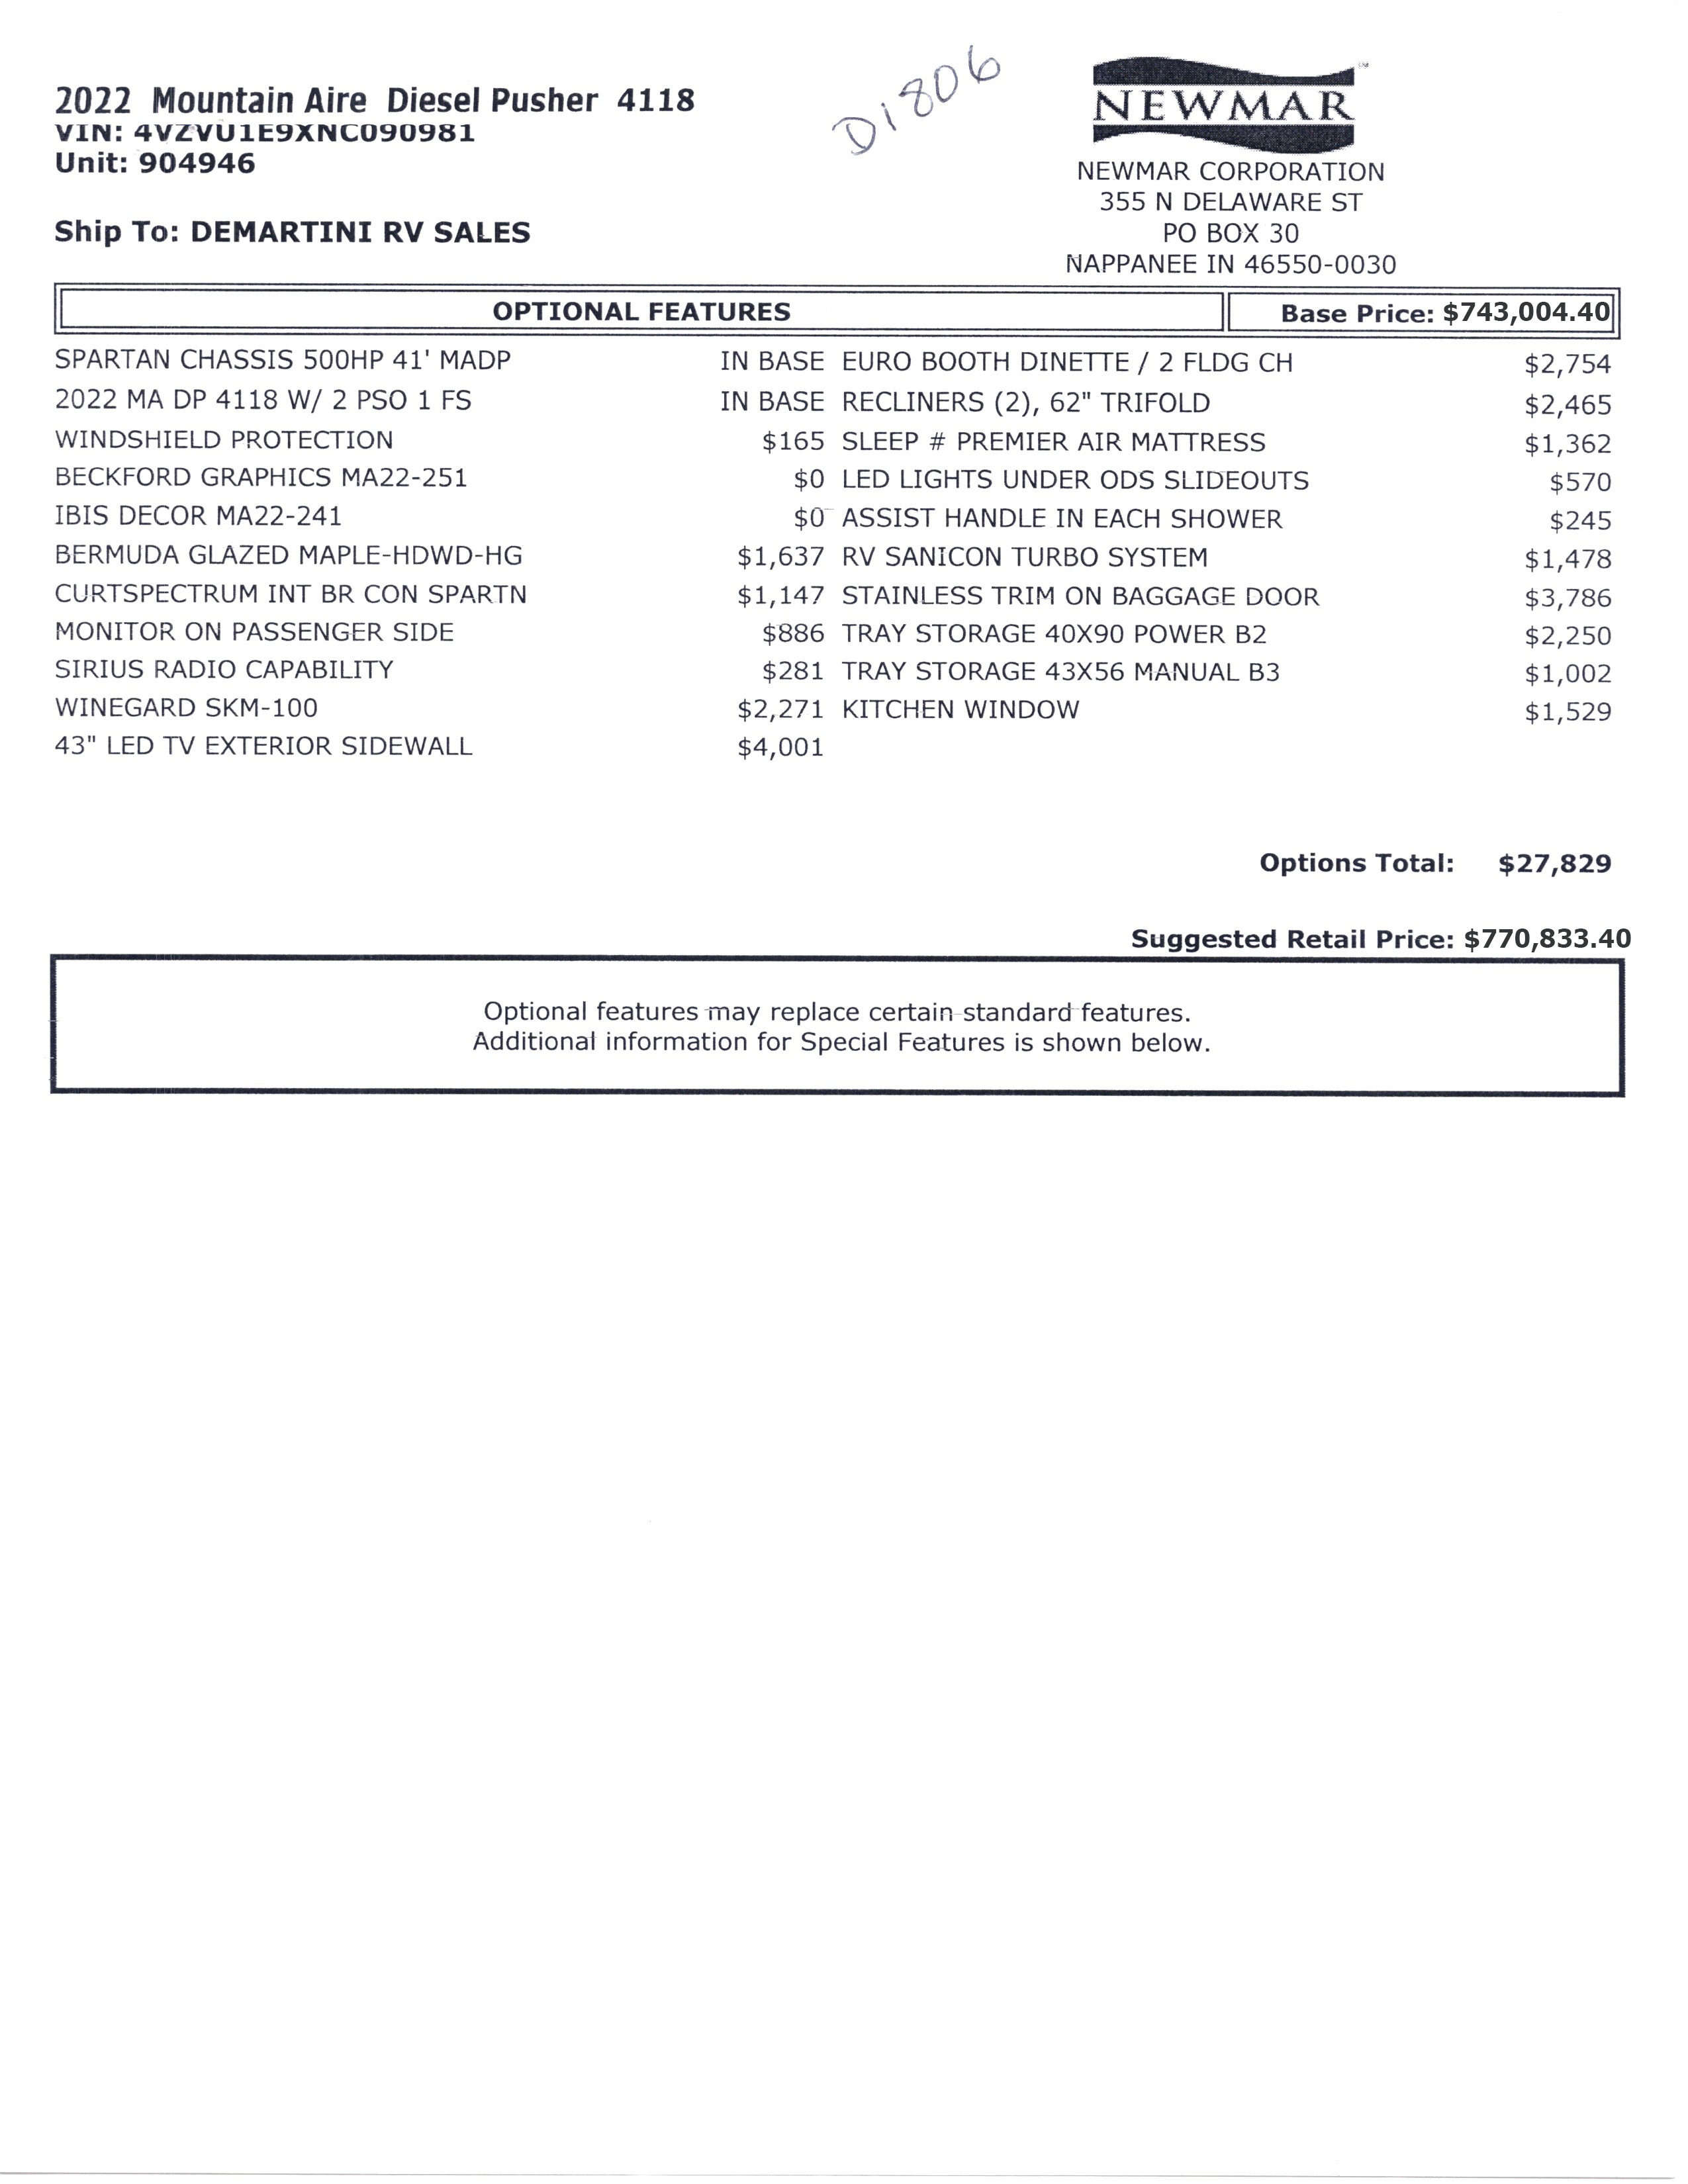 2022 Newmar Mountain Aire 4118 MSRP Sheet